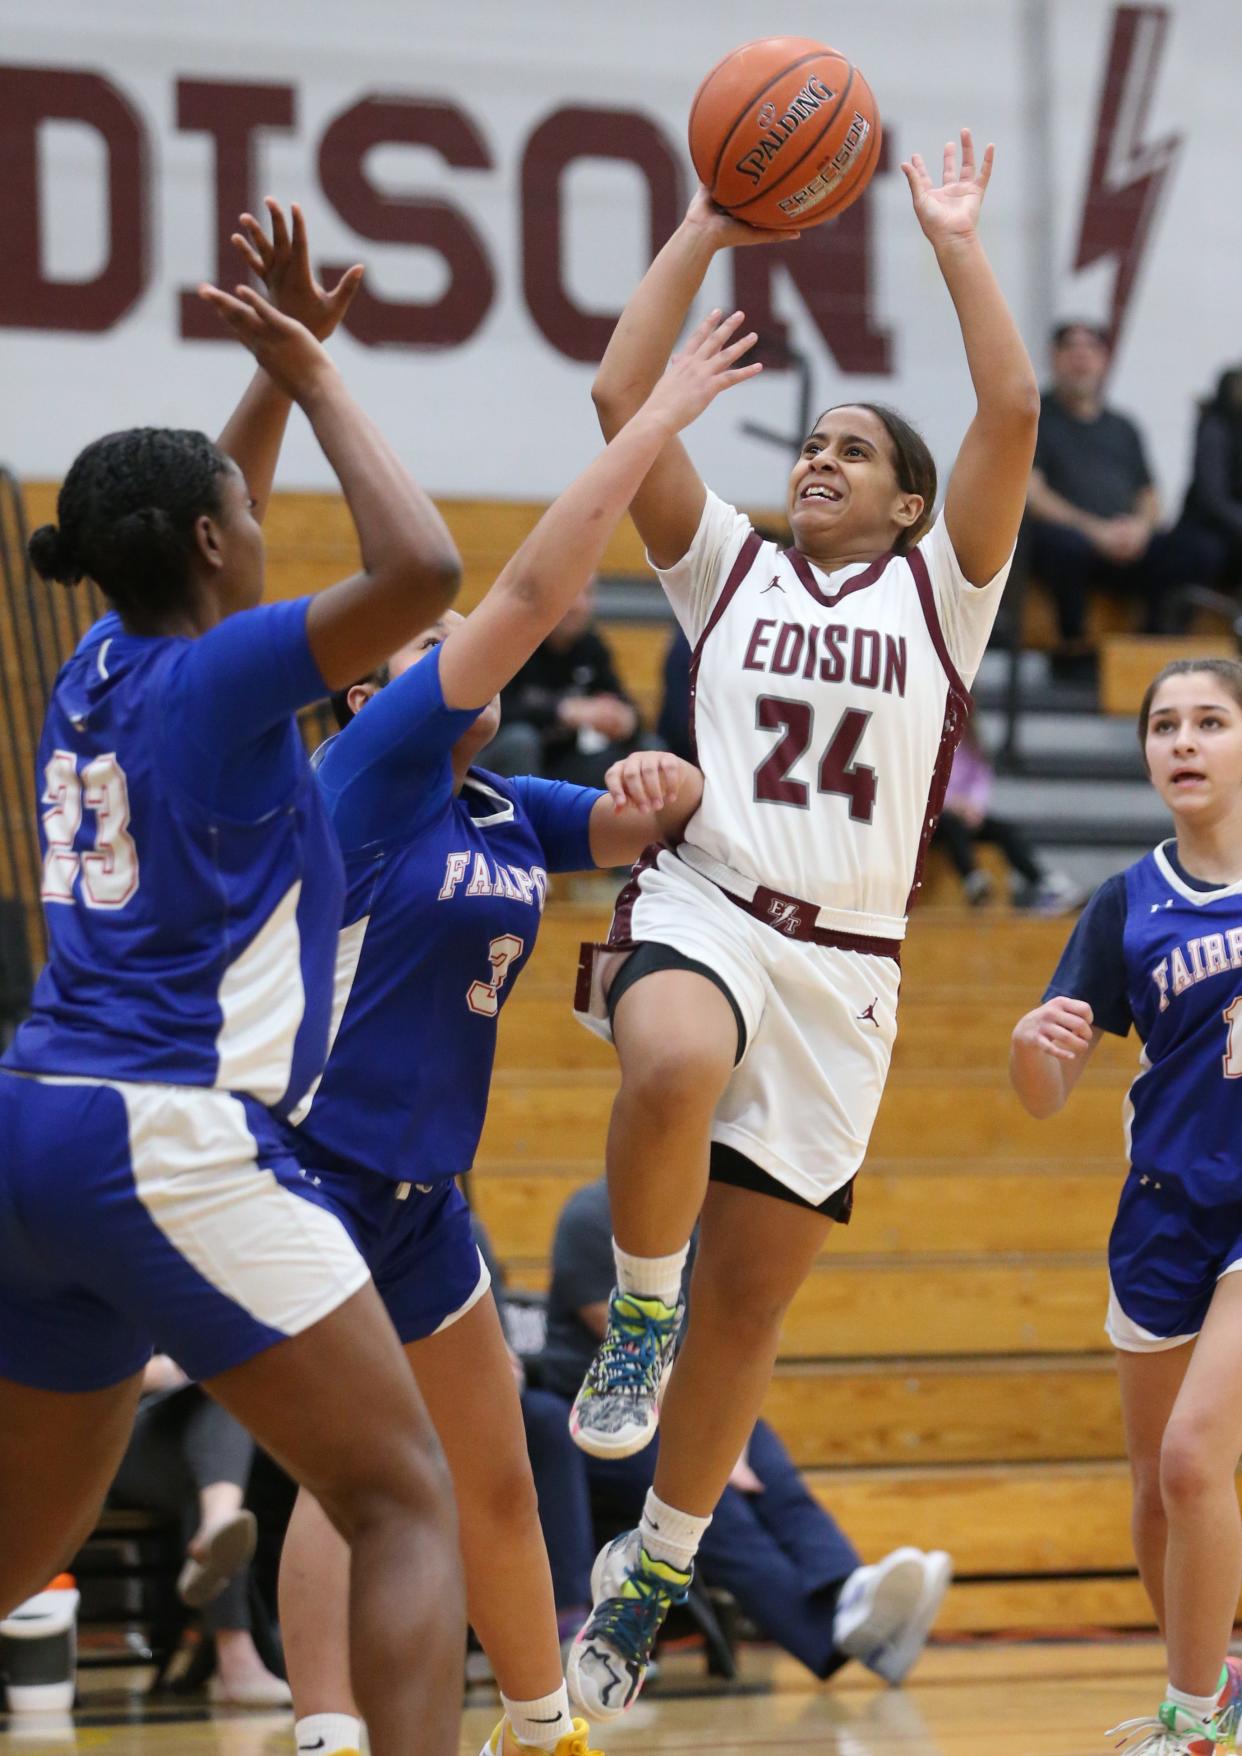 Edison's NaKayla Costello drives to the basket to score over Fairport's Jada Crocker and Amiya Johnson in the first quarter.